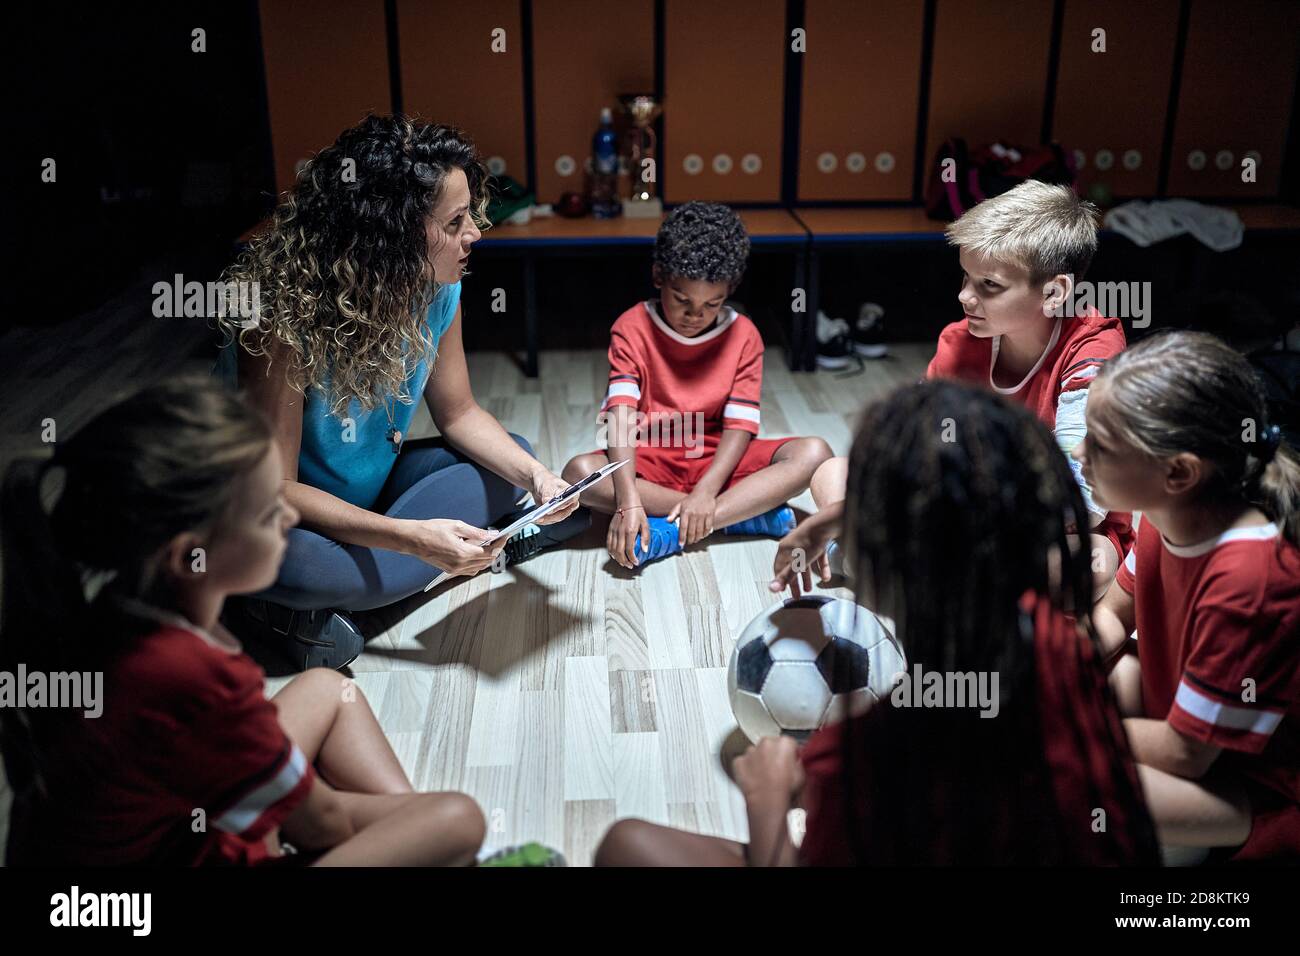 A female coach and her little players at the locker room discussing strategy for the match. Children team sport Stock Photo